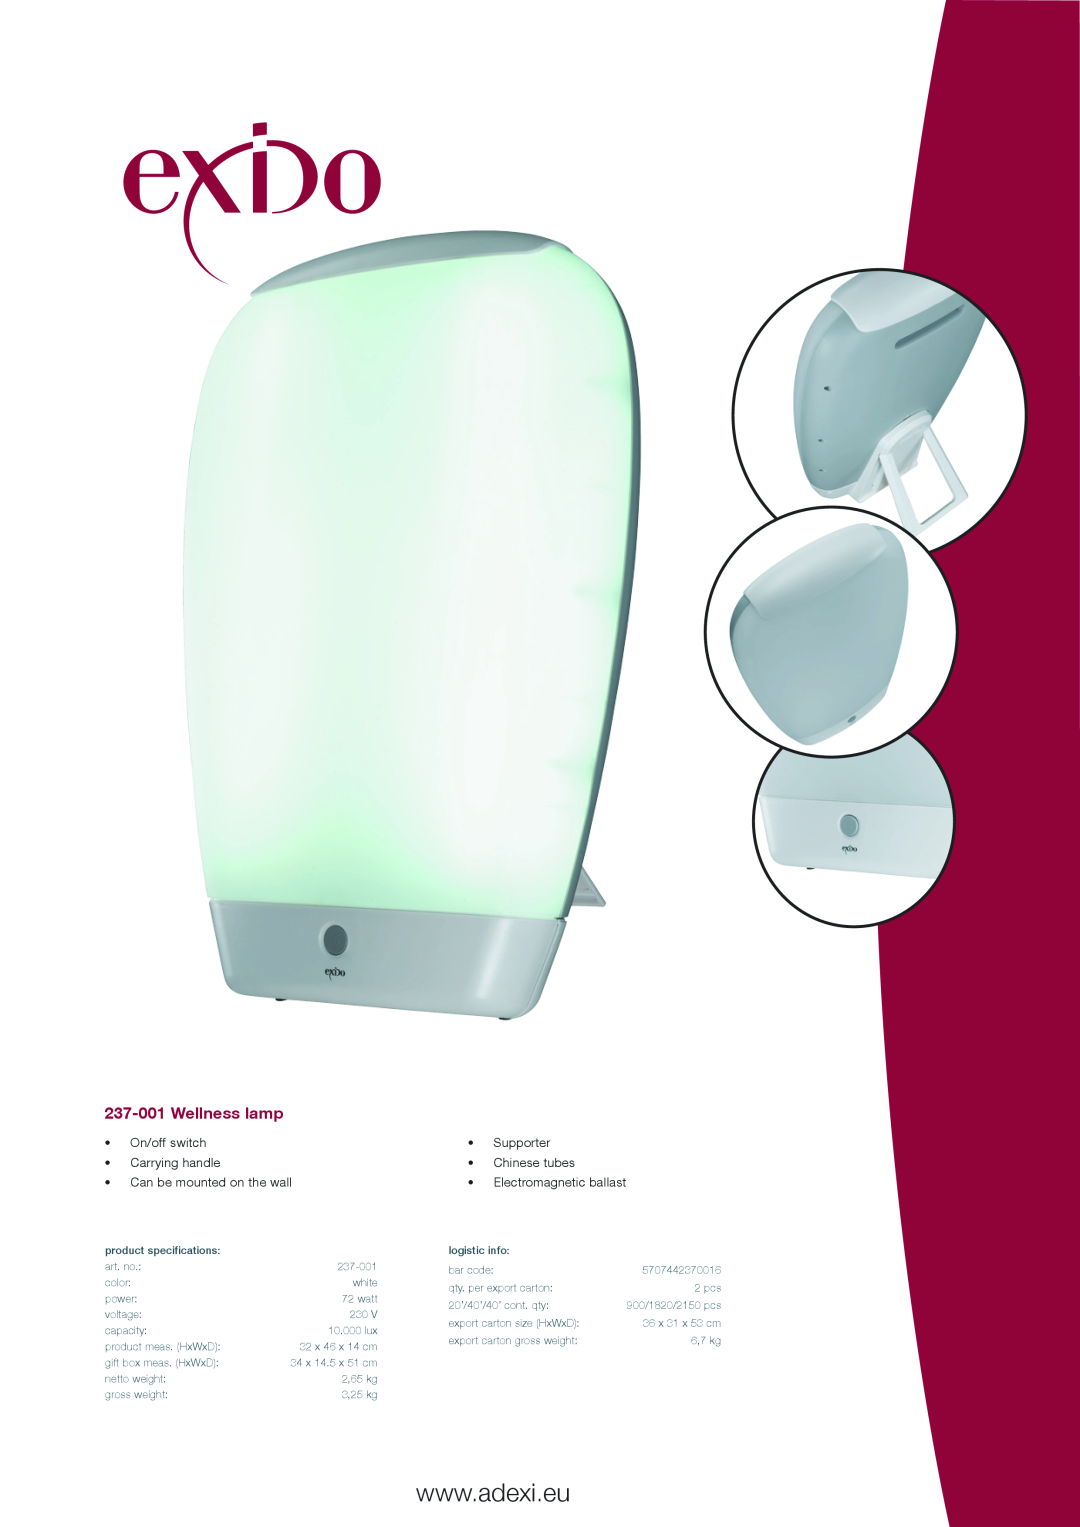 Melissa specifications 237-001Wellness lamp, On/off switch Carrying handle, Can be mounted on the wall 